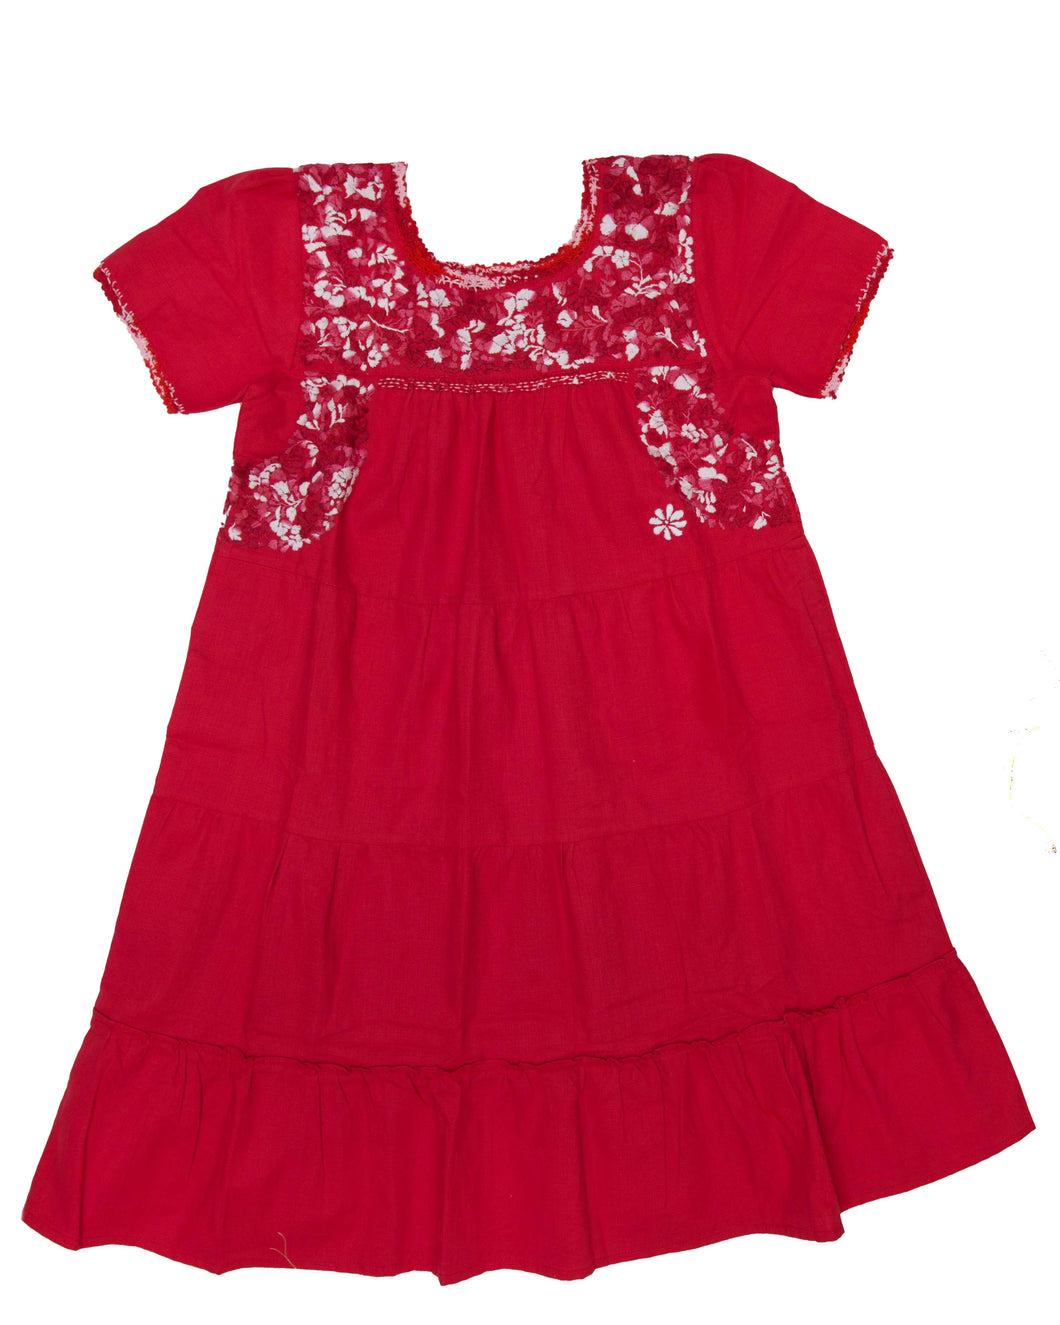 Girls Gabriela Dress | Red with Red Ombre